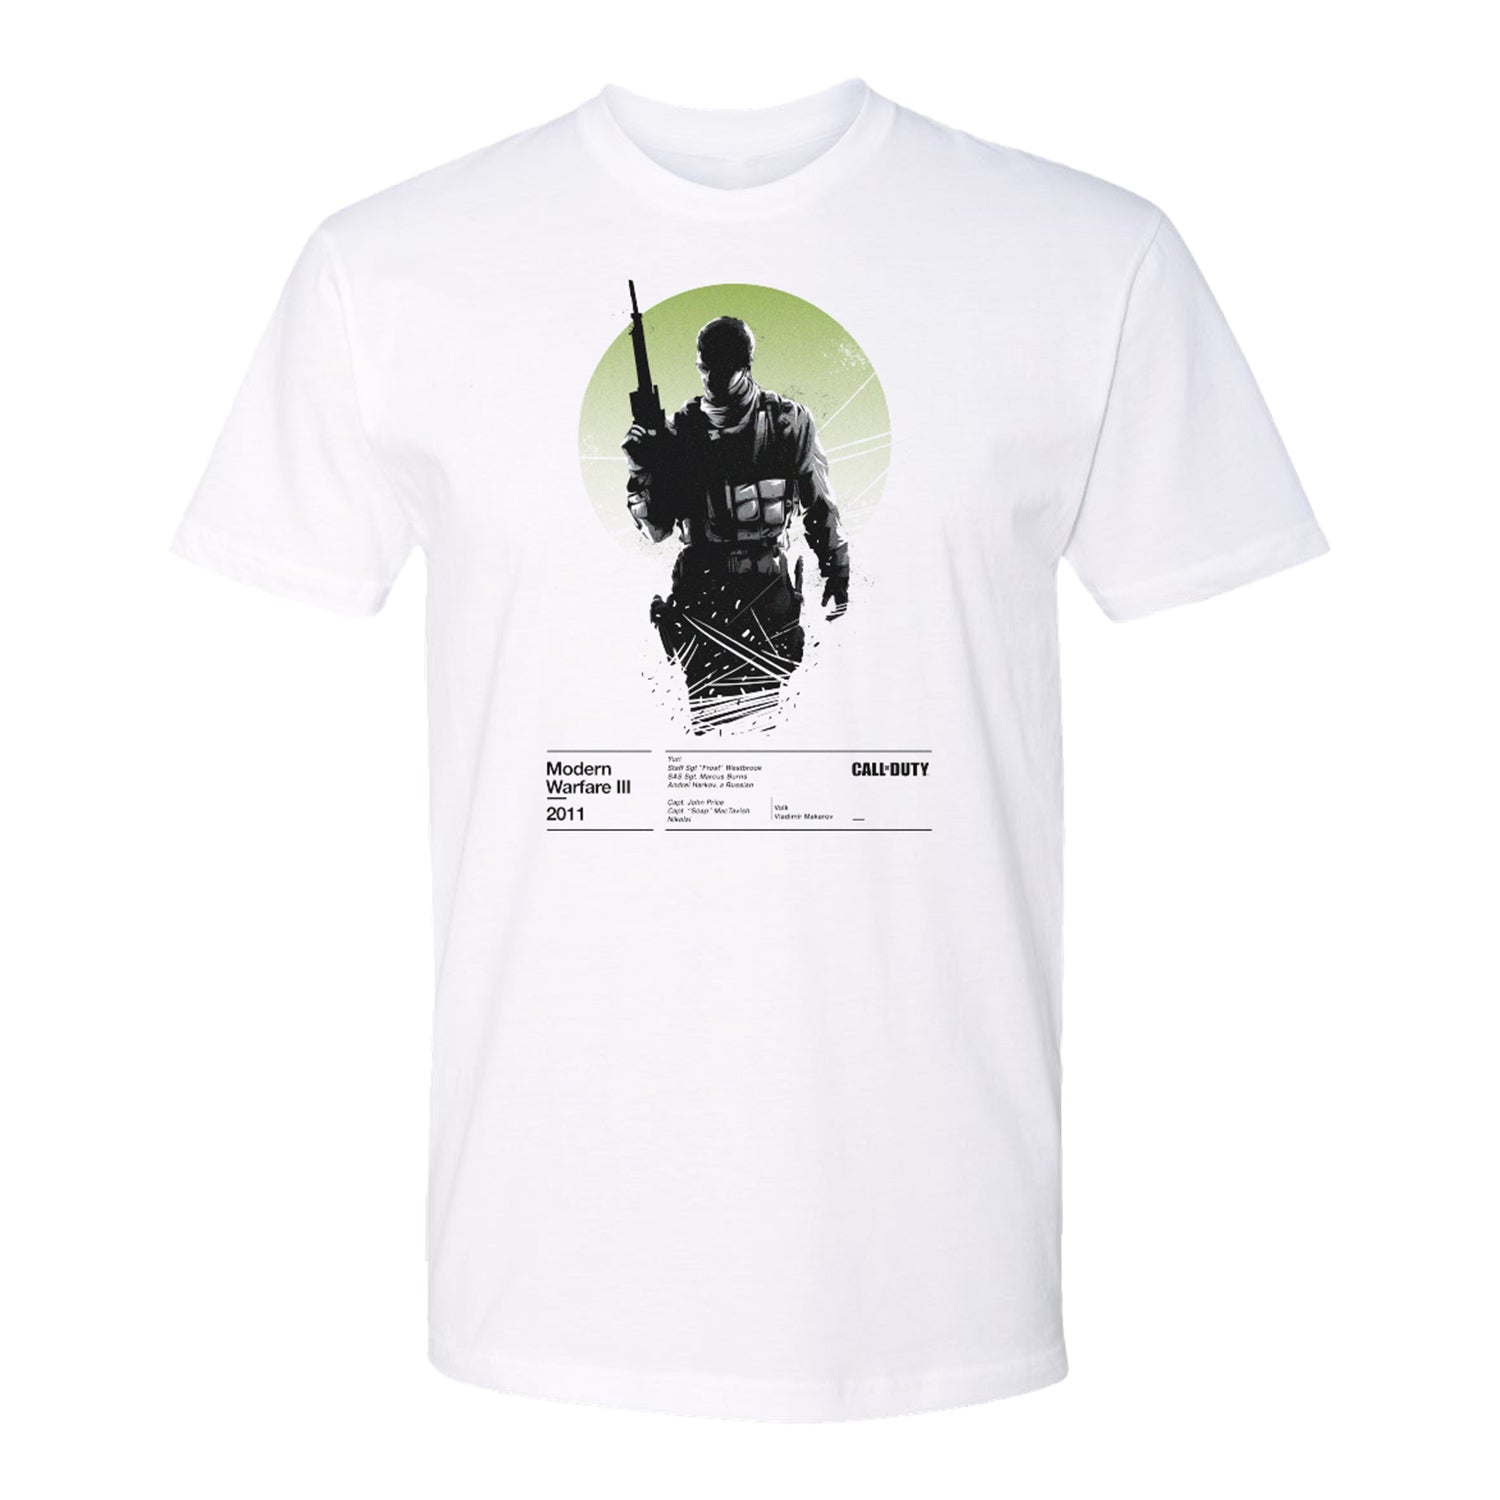 Call of Duty Modern Warfare 3 (2011) T-Shirt - White Front View